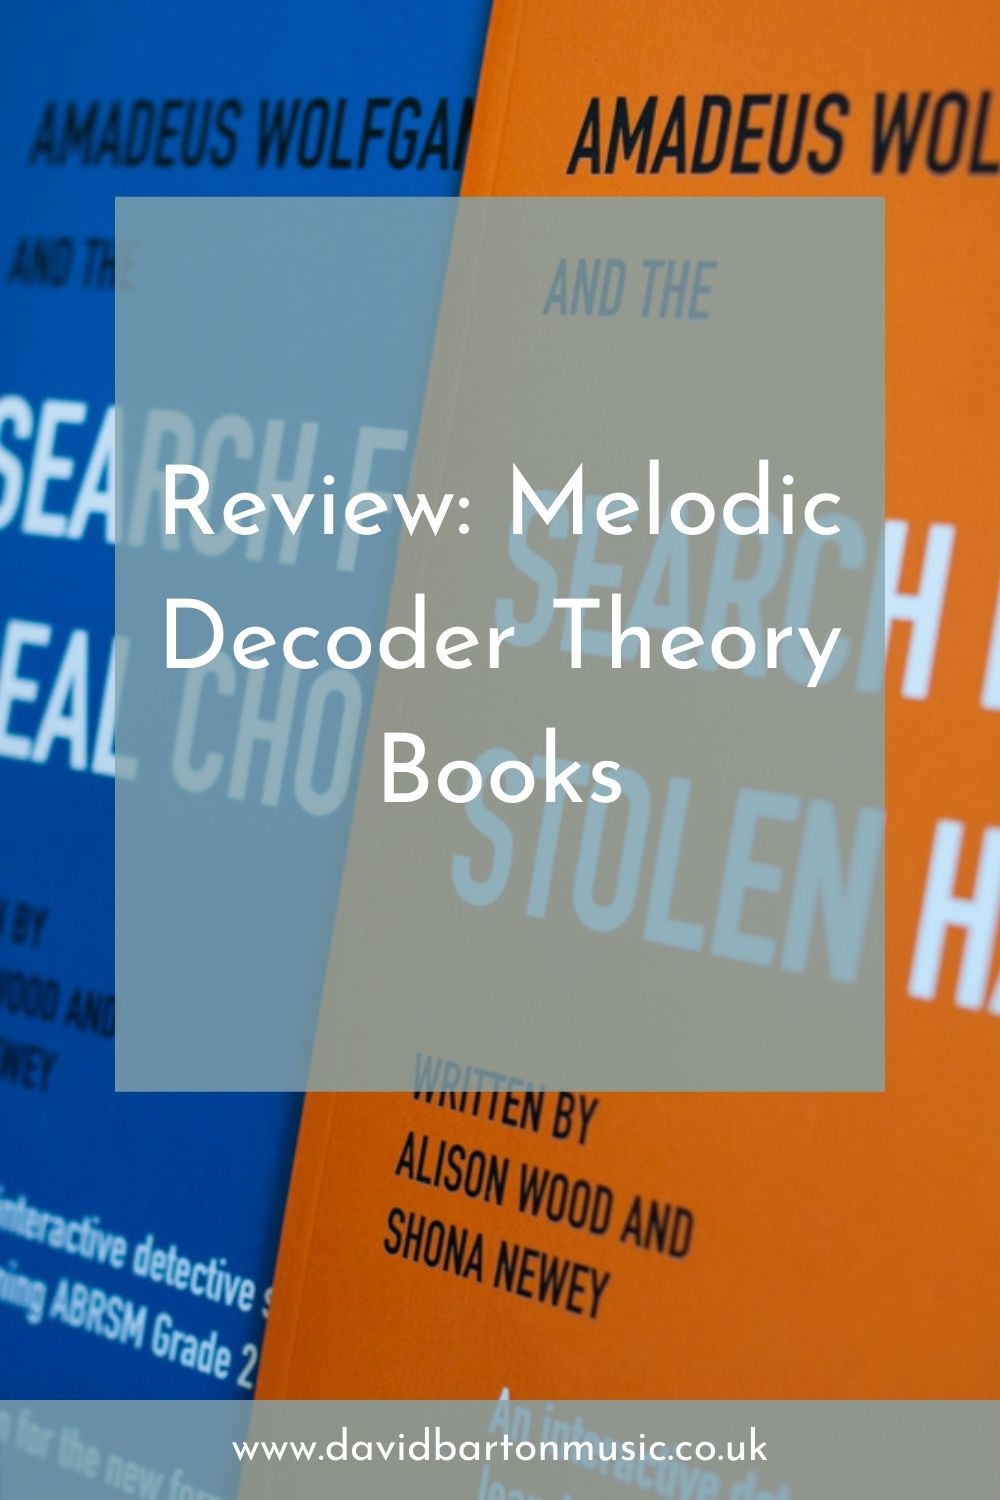 Review: Melodic Decoder Theory Books - Pinterest graphic